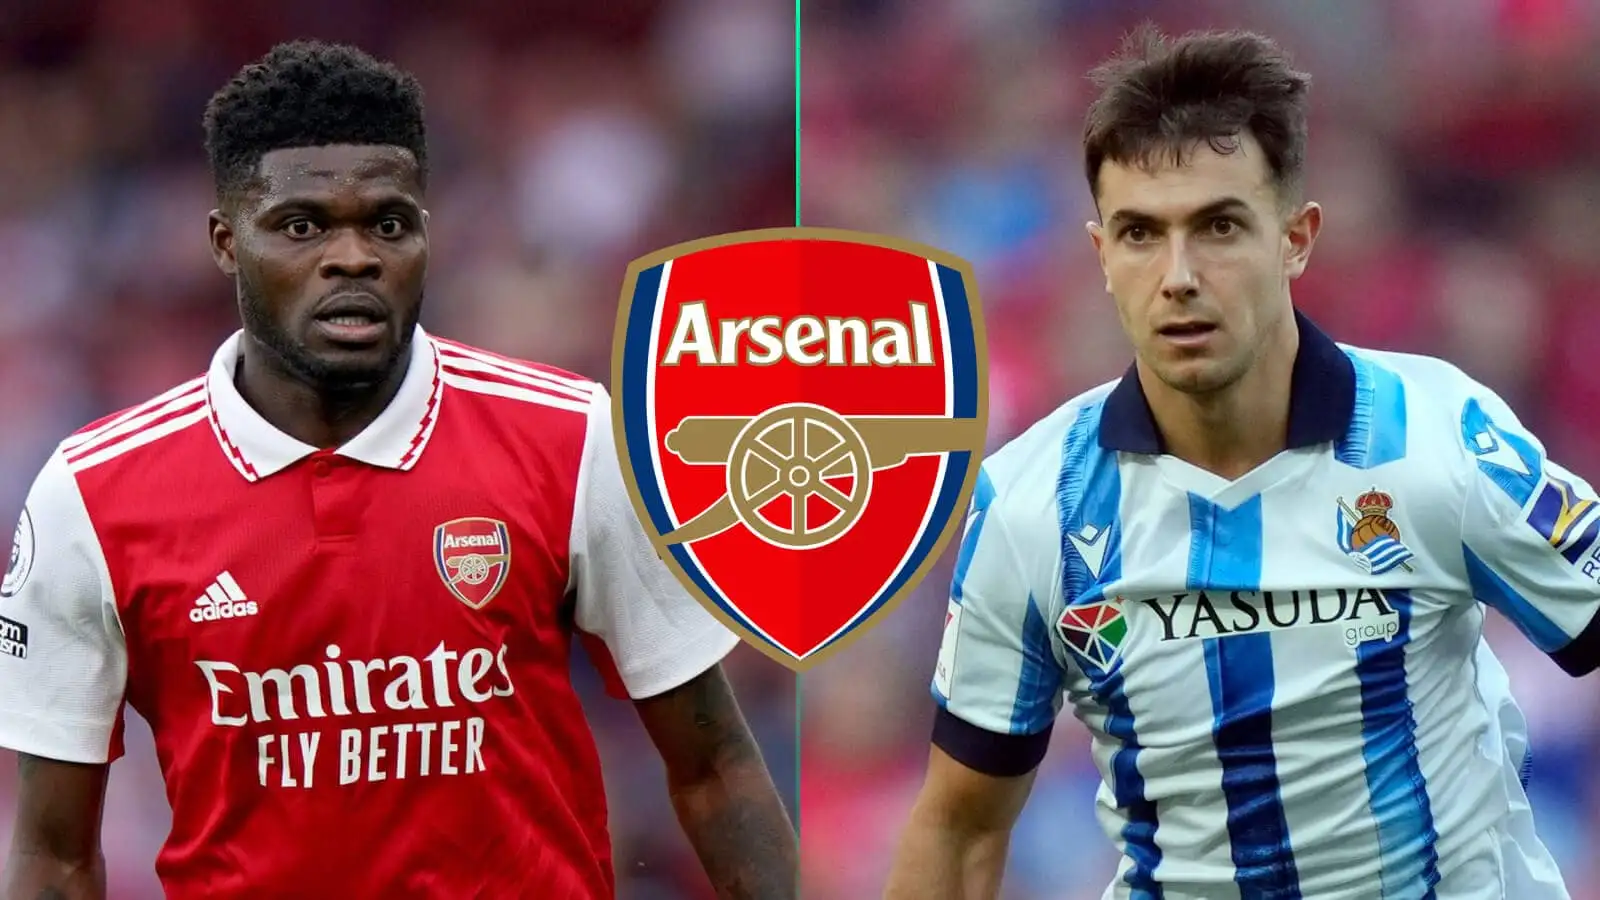 Thomas Partey and Martin Zubimendi either side of the Arsenal badge